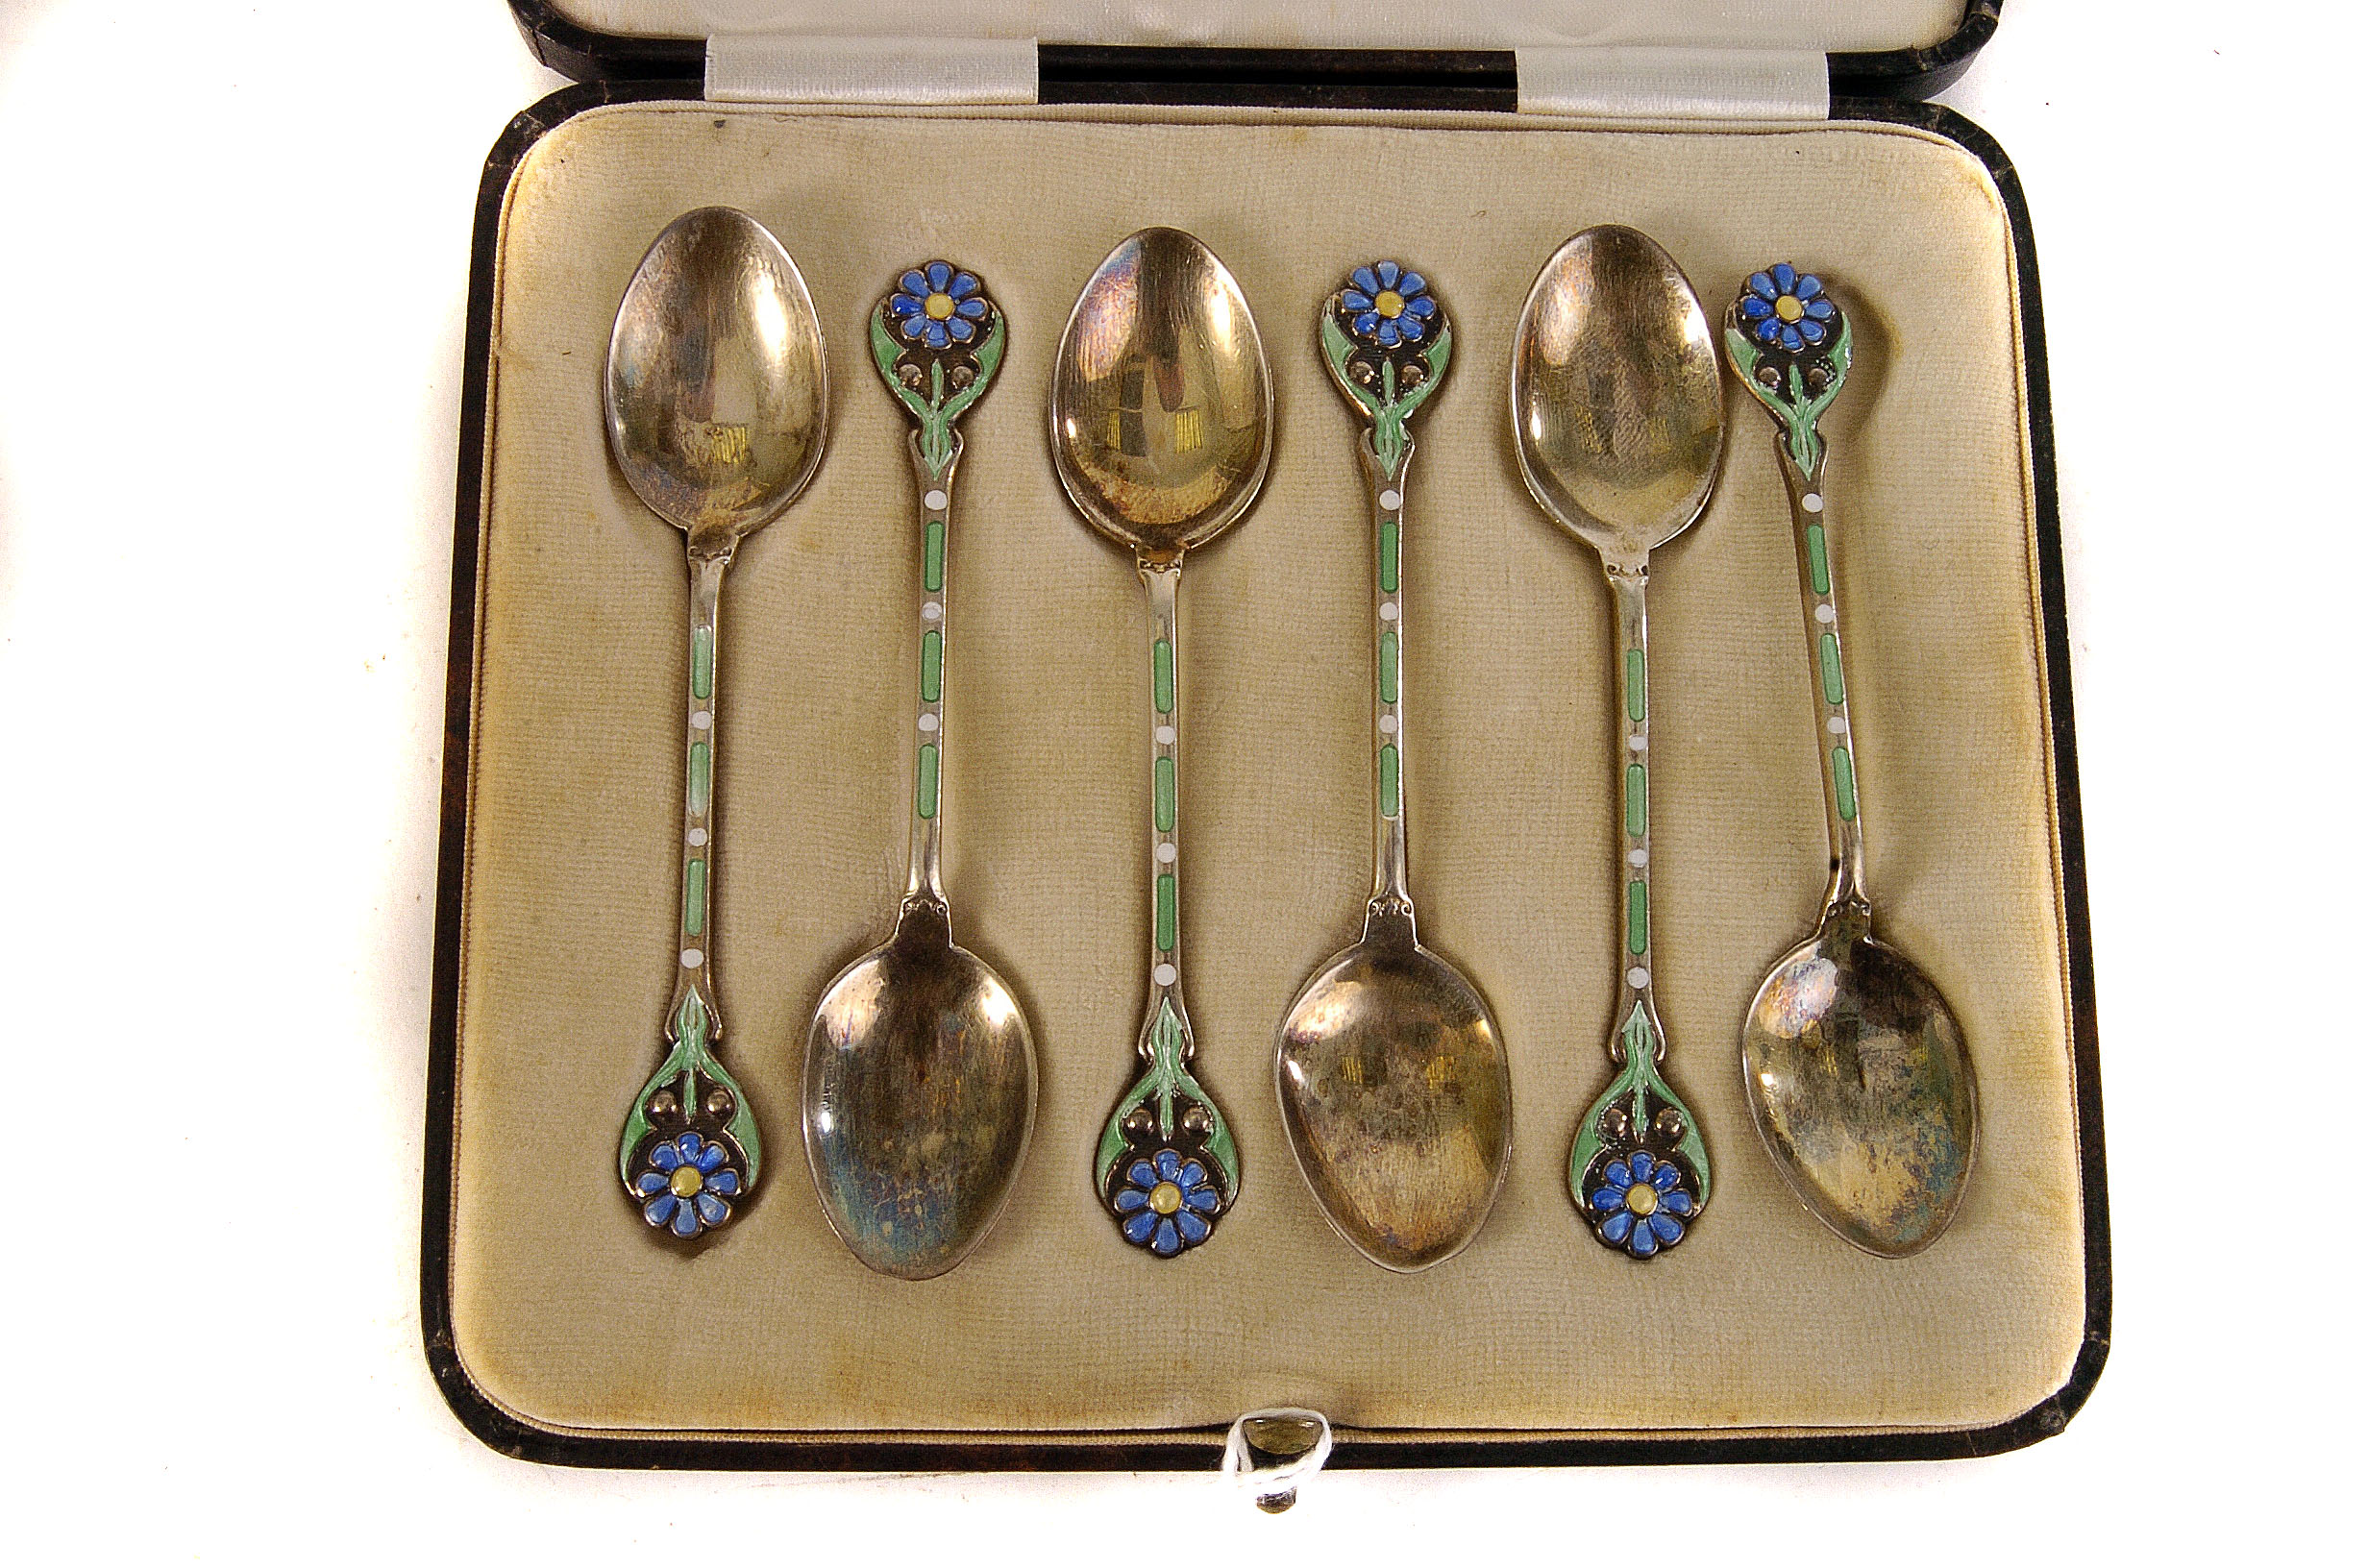 A cased set of six George V silver and enamel tea spoons, marked Birmingham 1937 by T&S, with